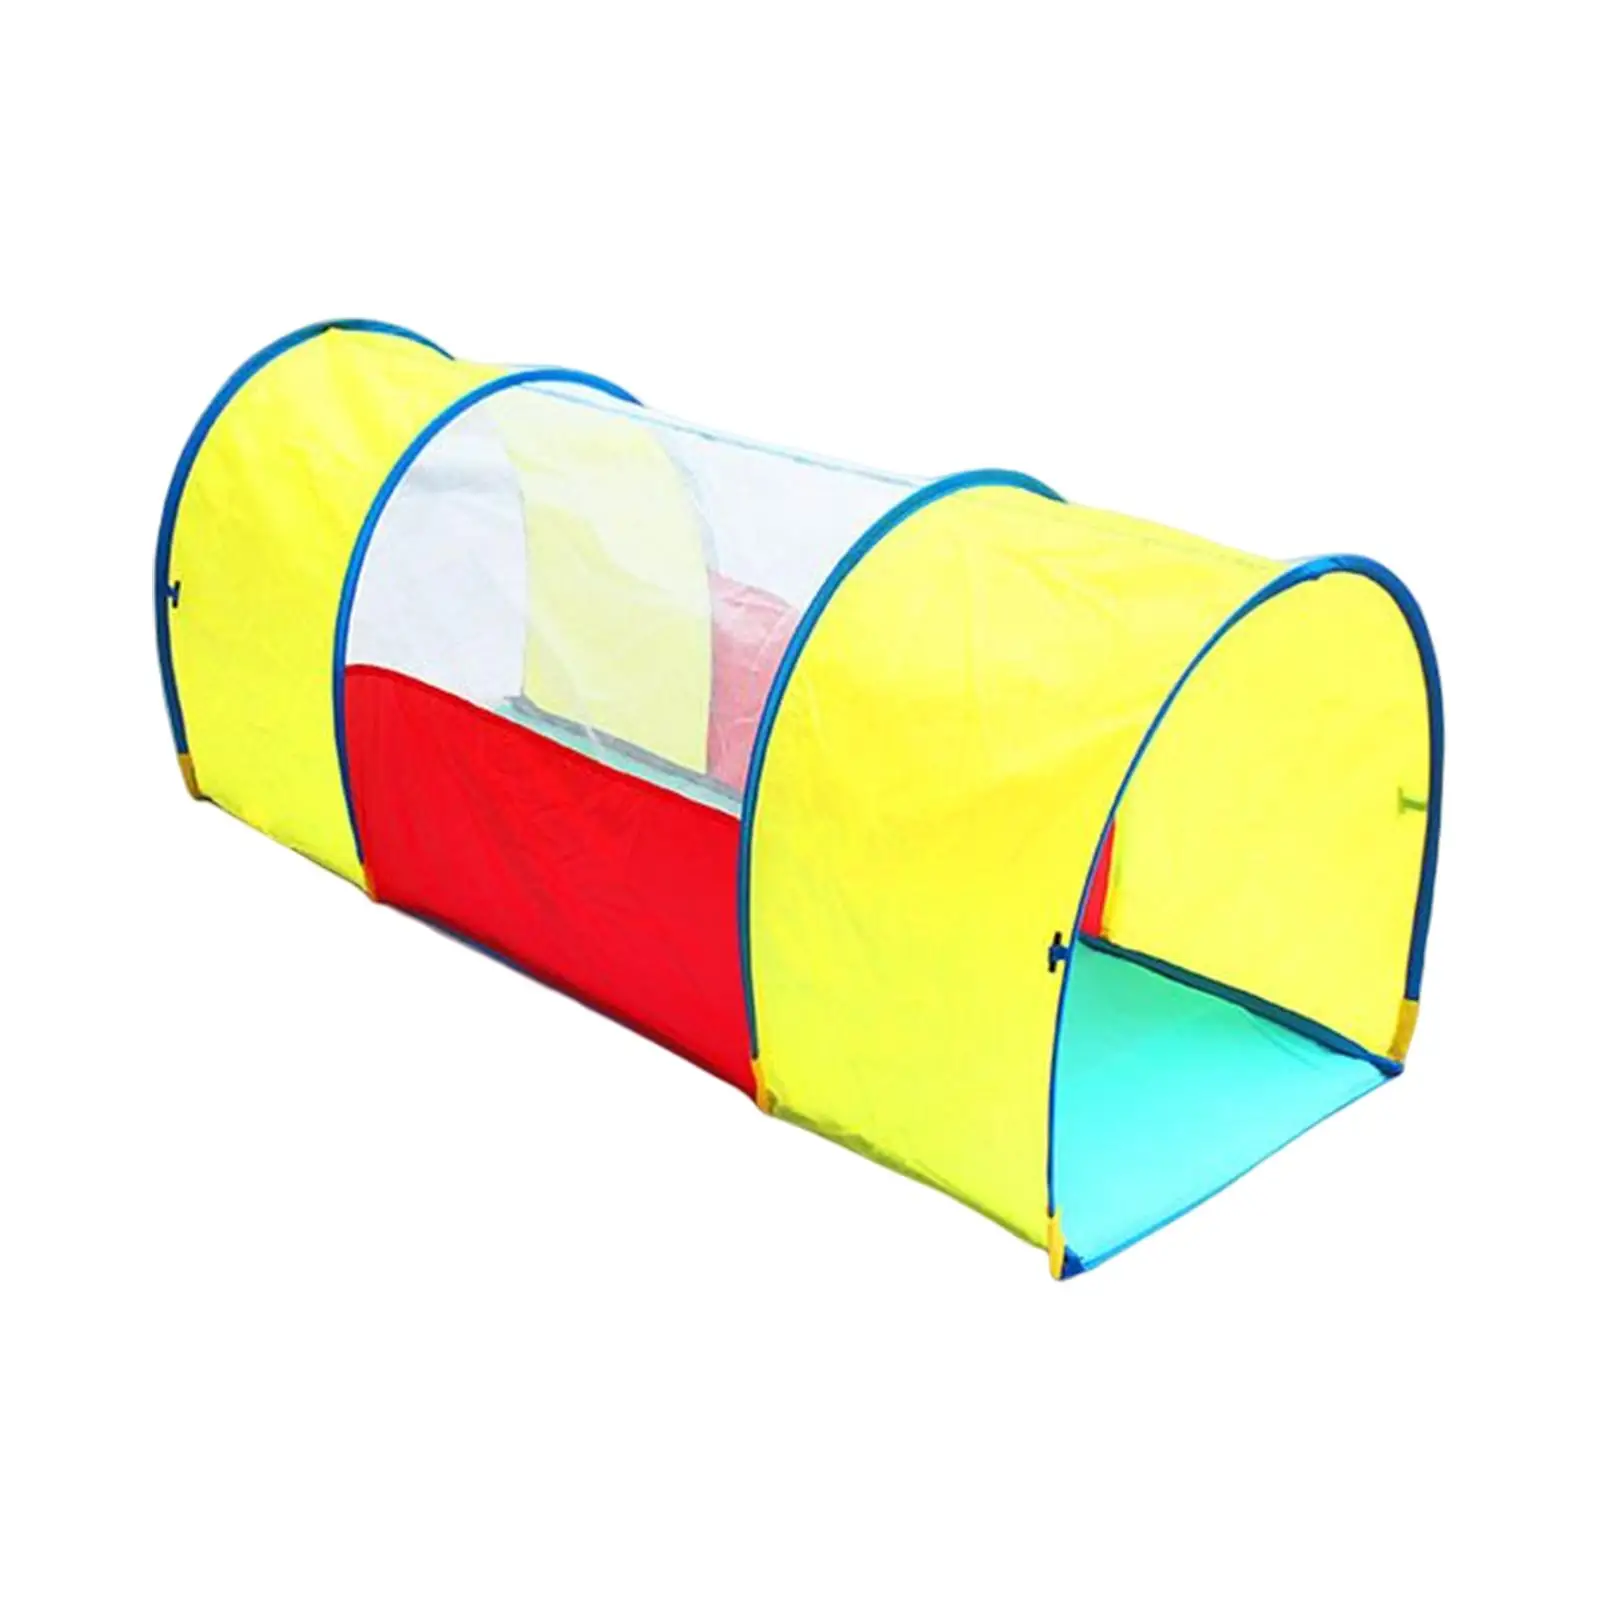 Portable Play Tent Toy Backyard Playset Indoor Outdoor Game for Toddlers